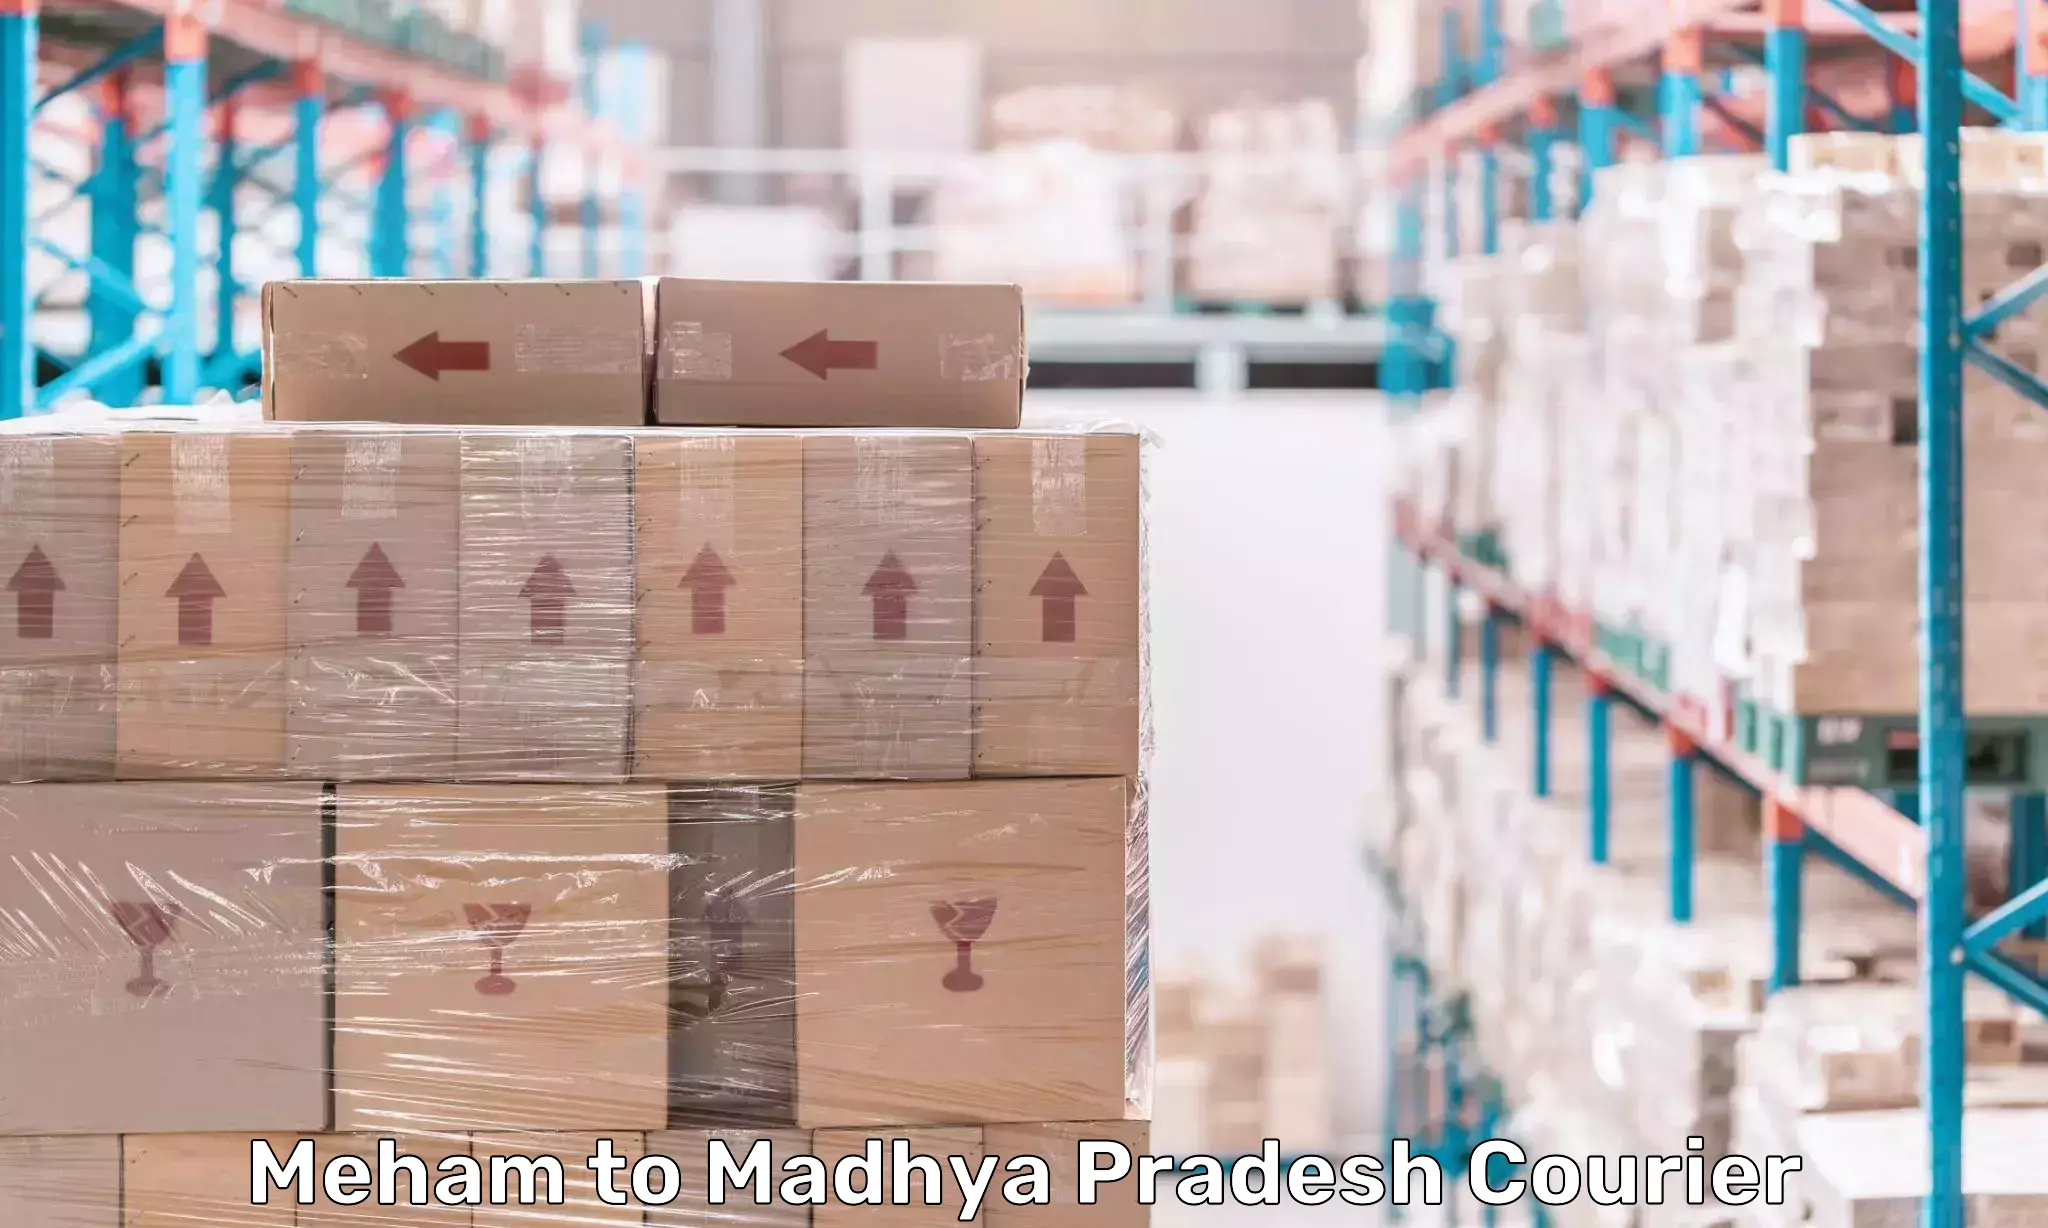 State-of-the-art courier technology Meham to Rampur Baghelan